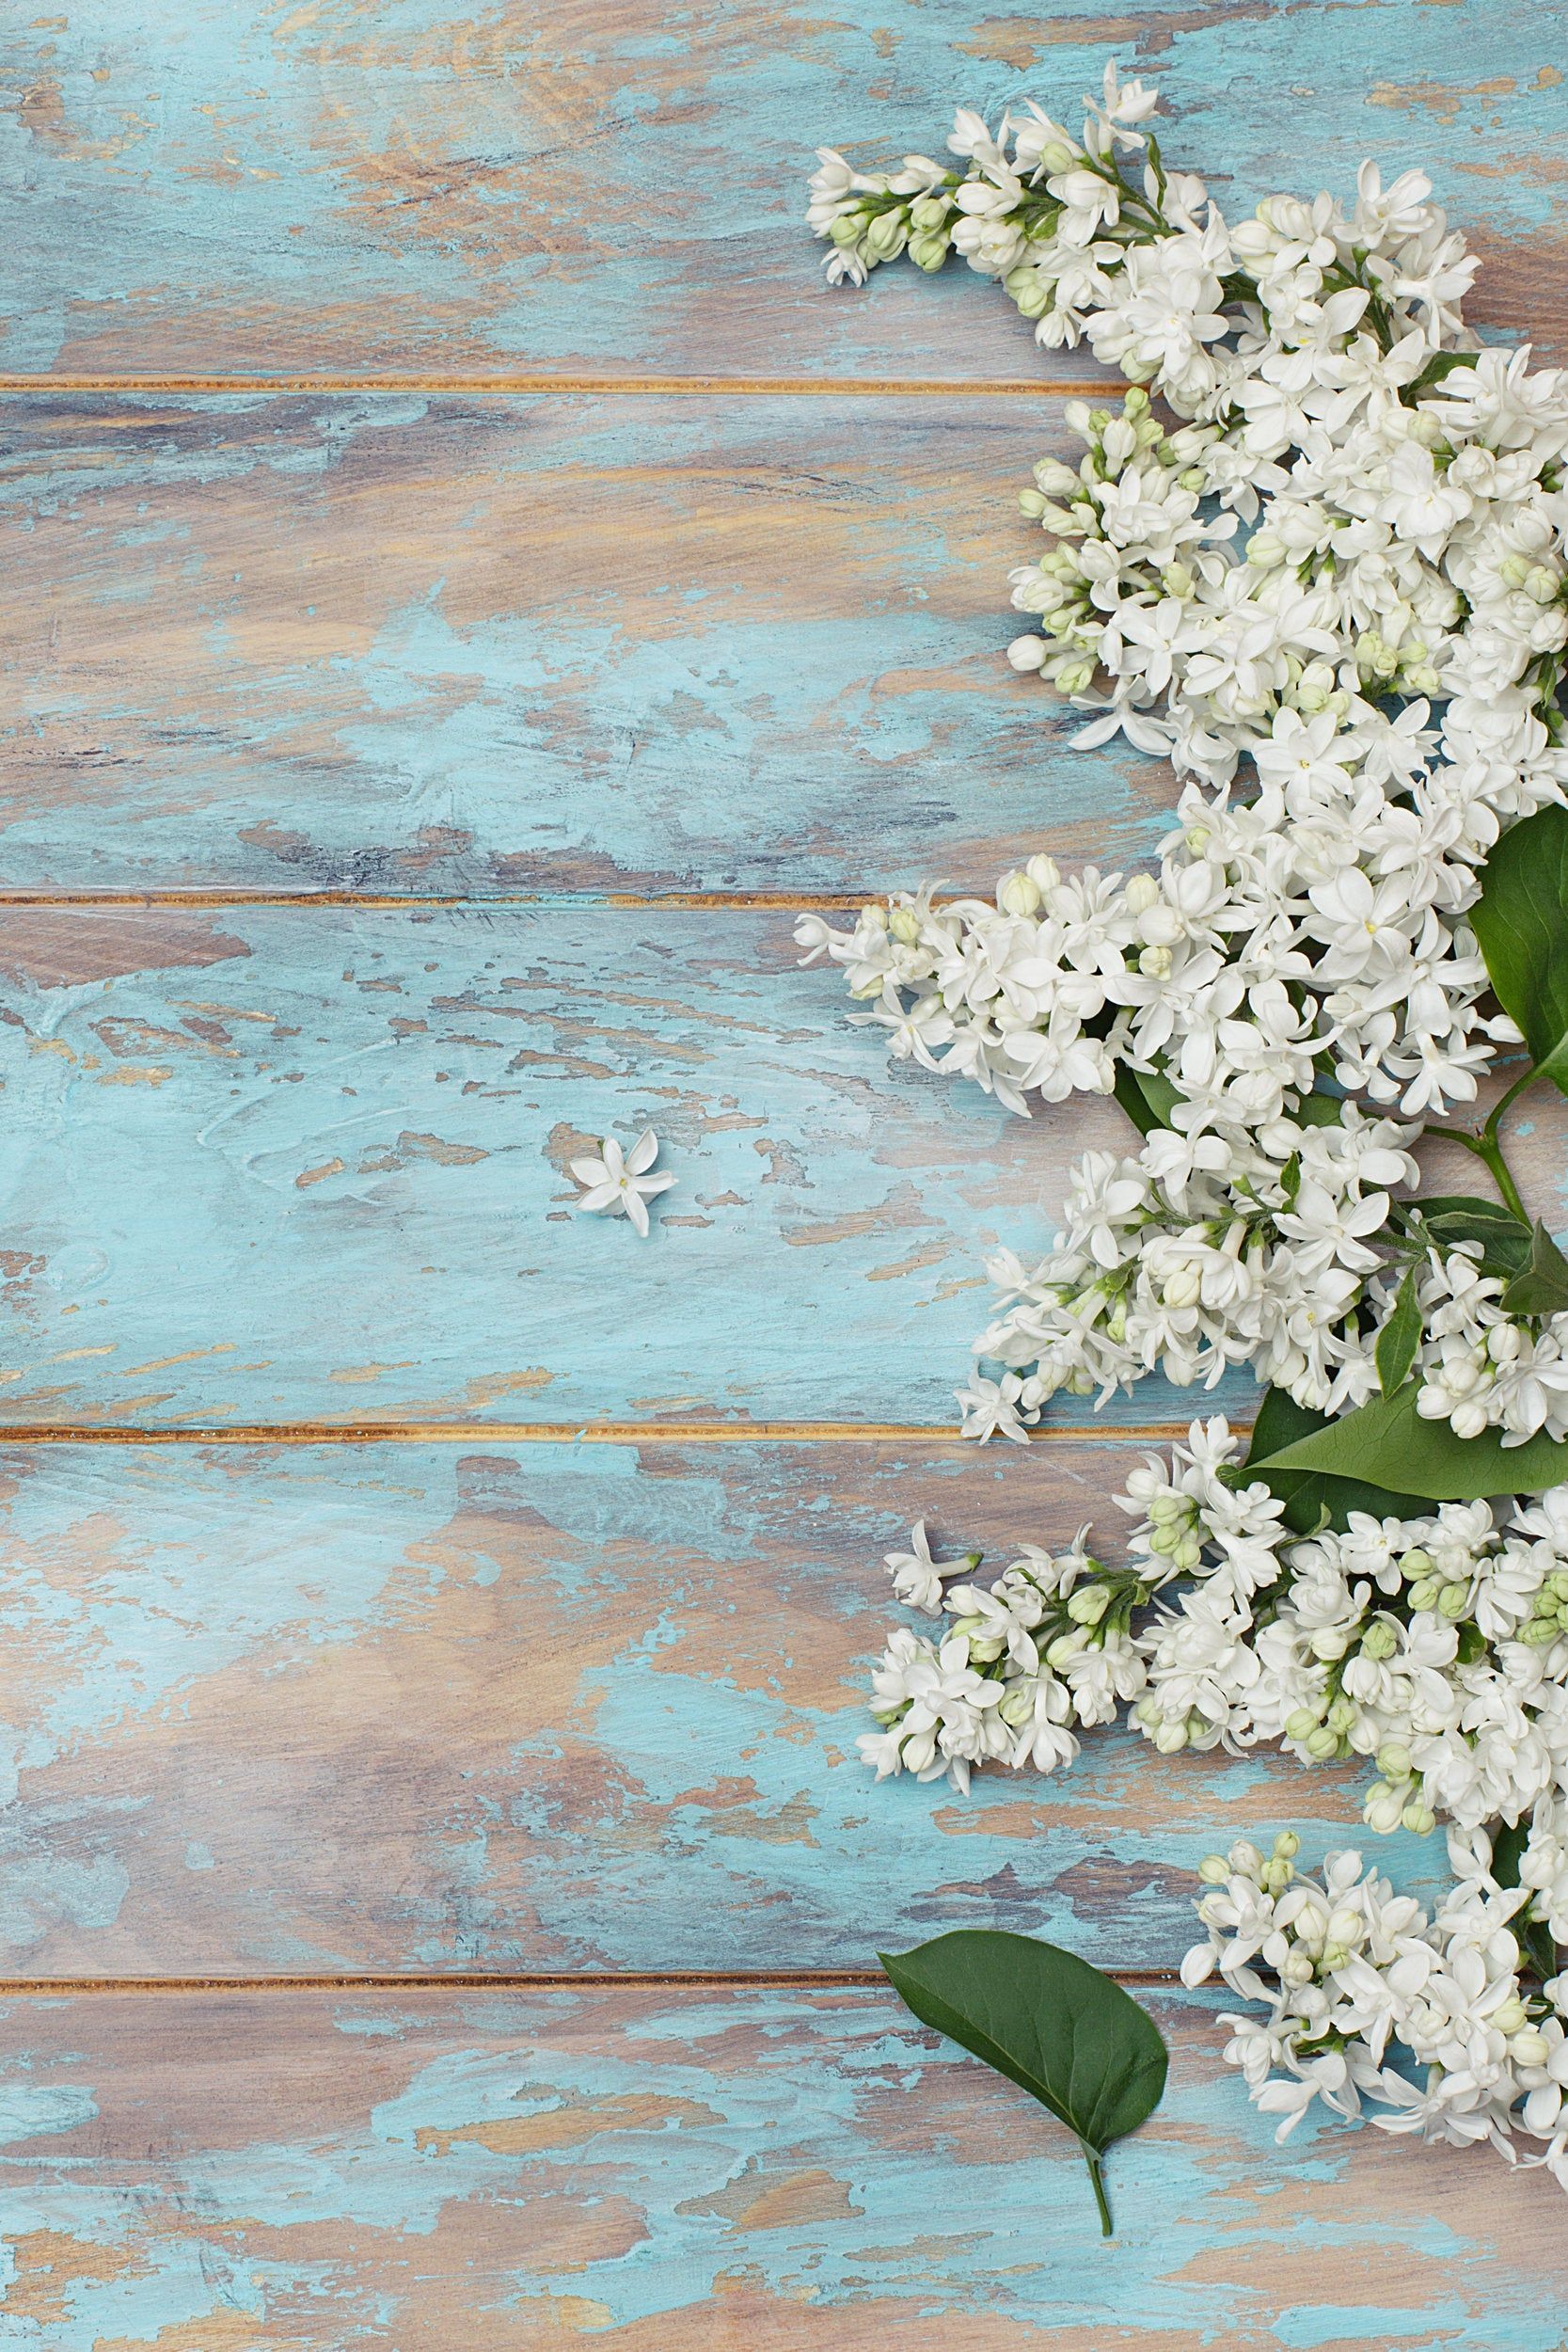 Rustic Flower Background